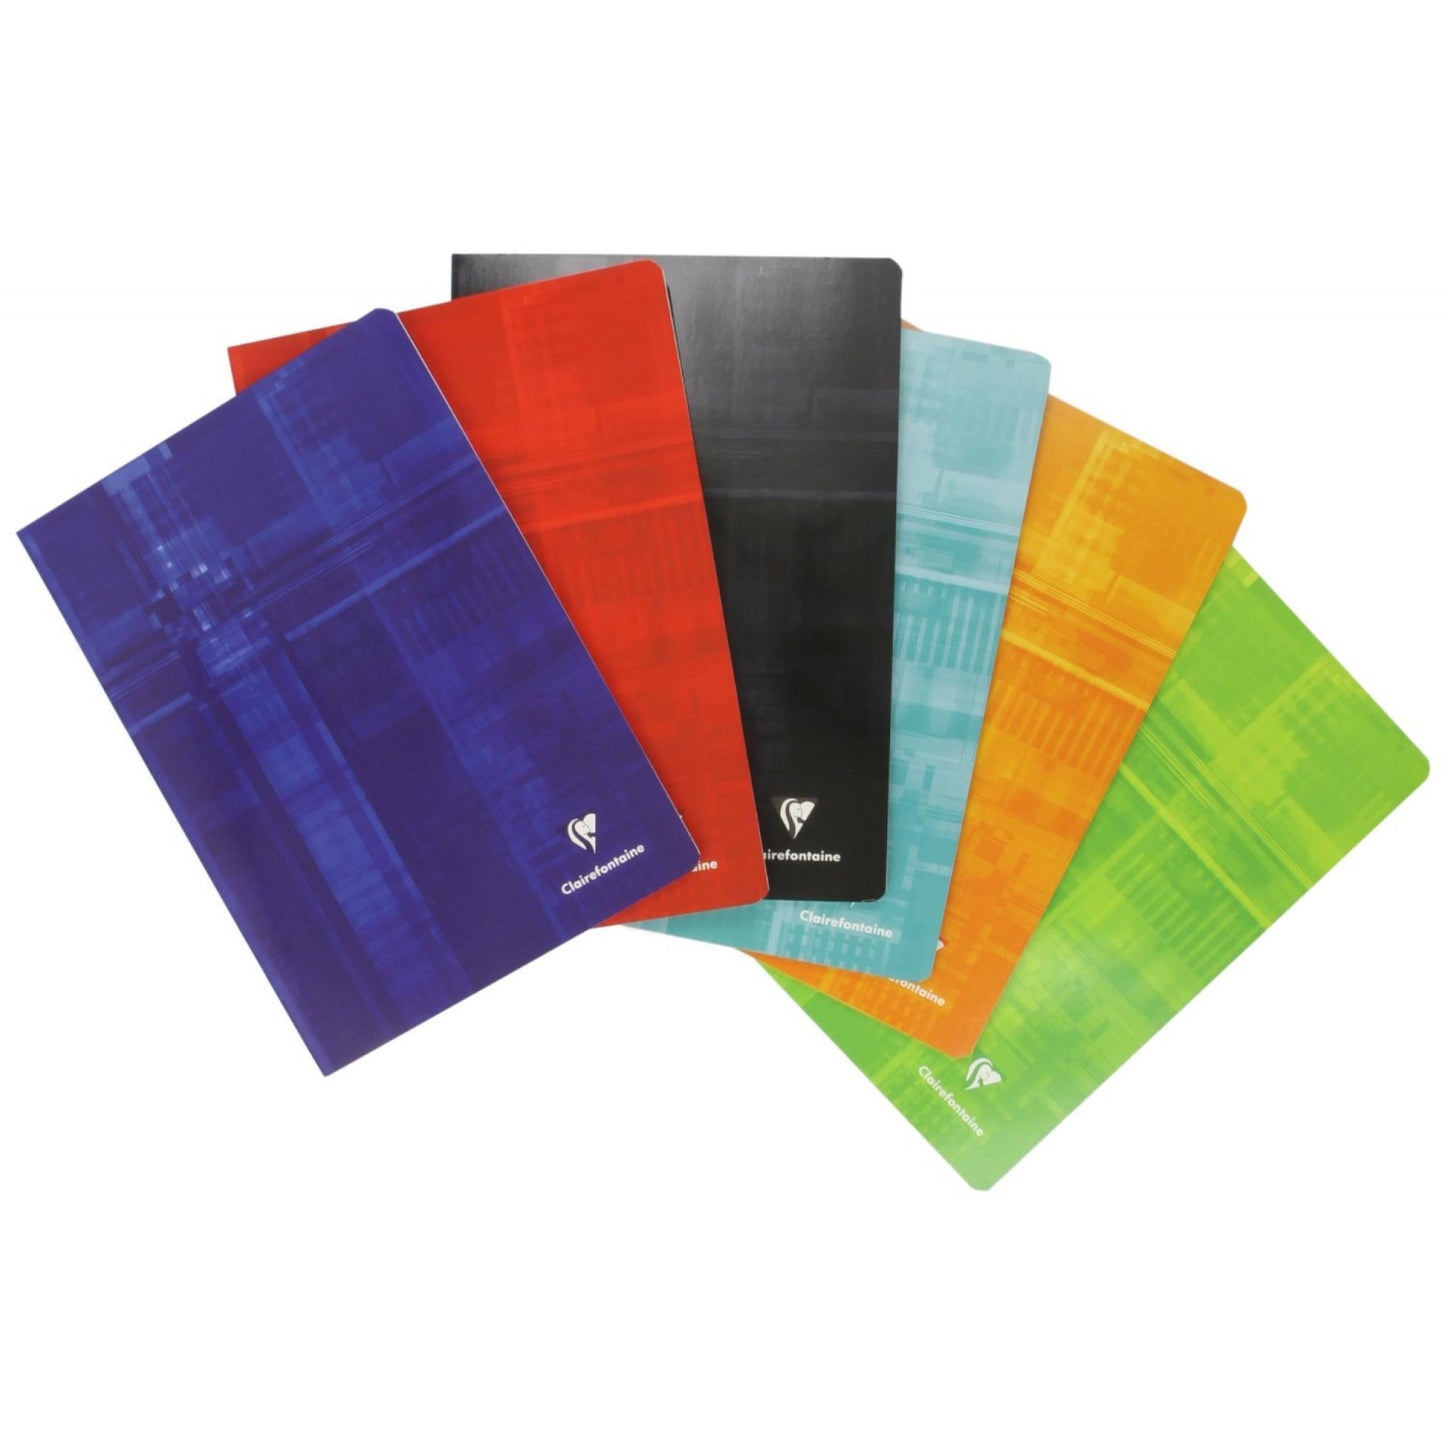 Clairefontaine #383 Classic Lined with Margin Staplebound A5 Notebook (6.5 x 8.25) (Assorted)